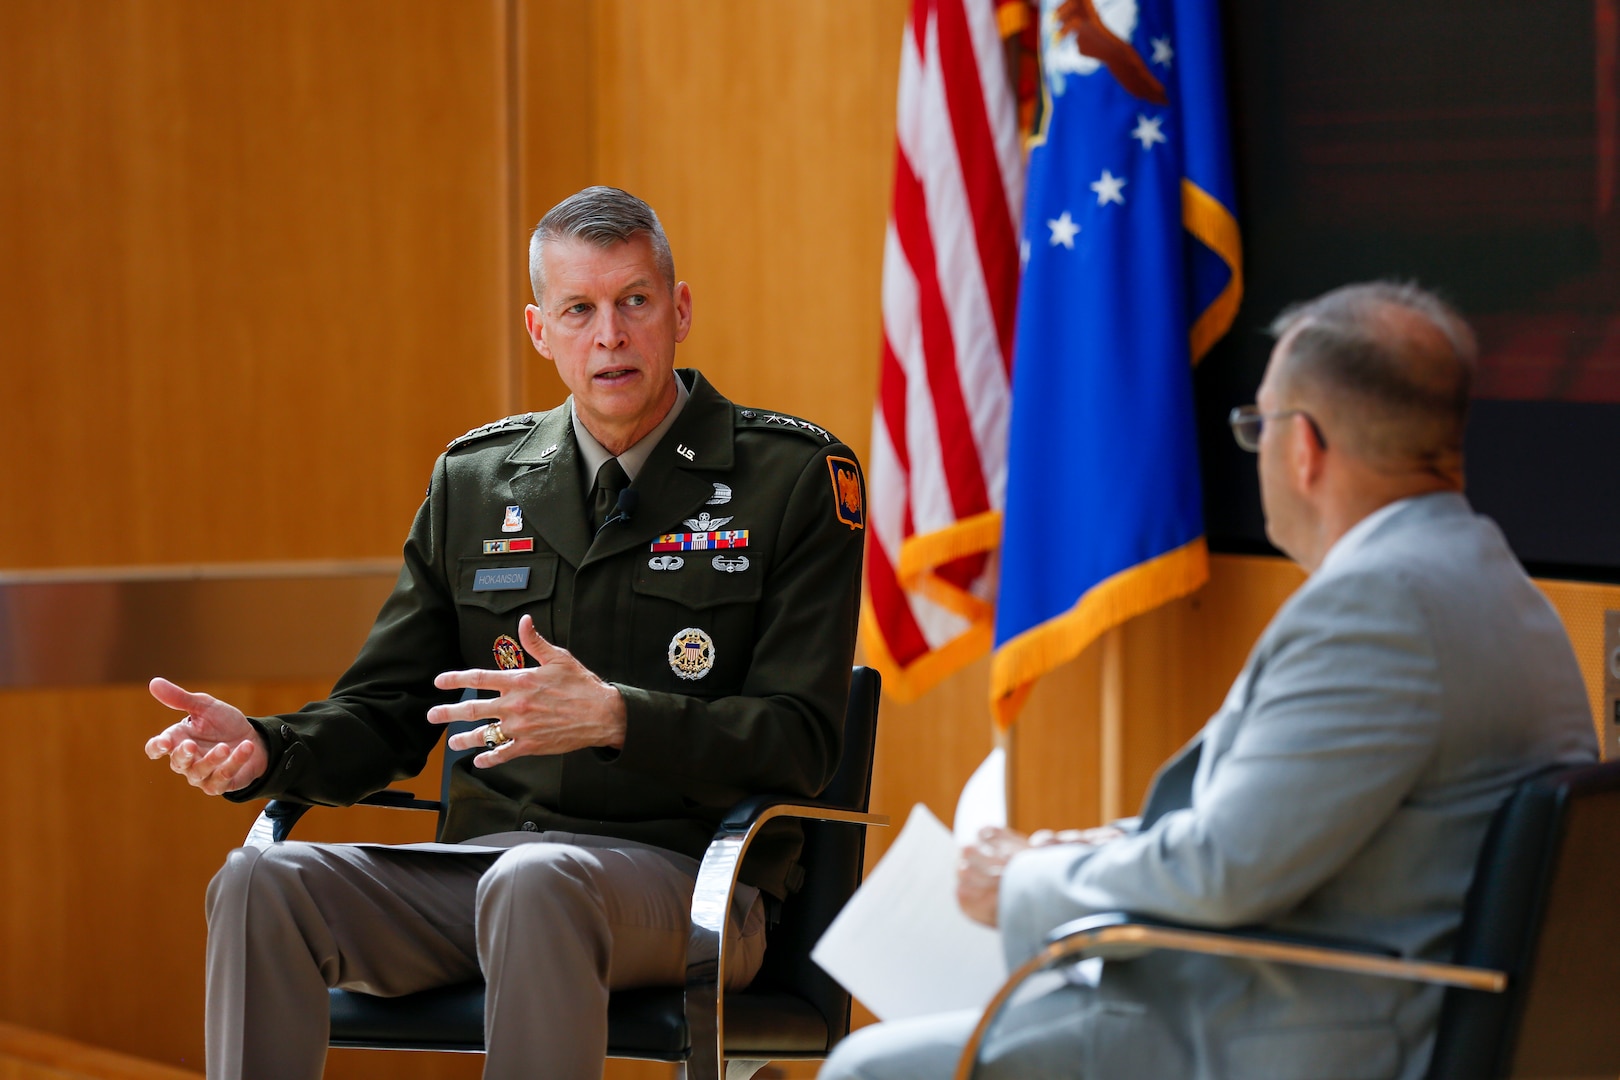 Army Gen. Daniel Hokanson, chief, National Guard Bureau, and Bert Tussing, director of Homeland Defense and Security Issues at United States Army War College, discuss the Guard's role in homeland defense at the North American Aerospace Defense Command and U.S. Northern Command’s inaugural Homeland Defense Awareness Symposium at the U.S. Air Force Academy in Colorado Springs, Colo., July 14, 2022.